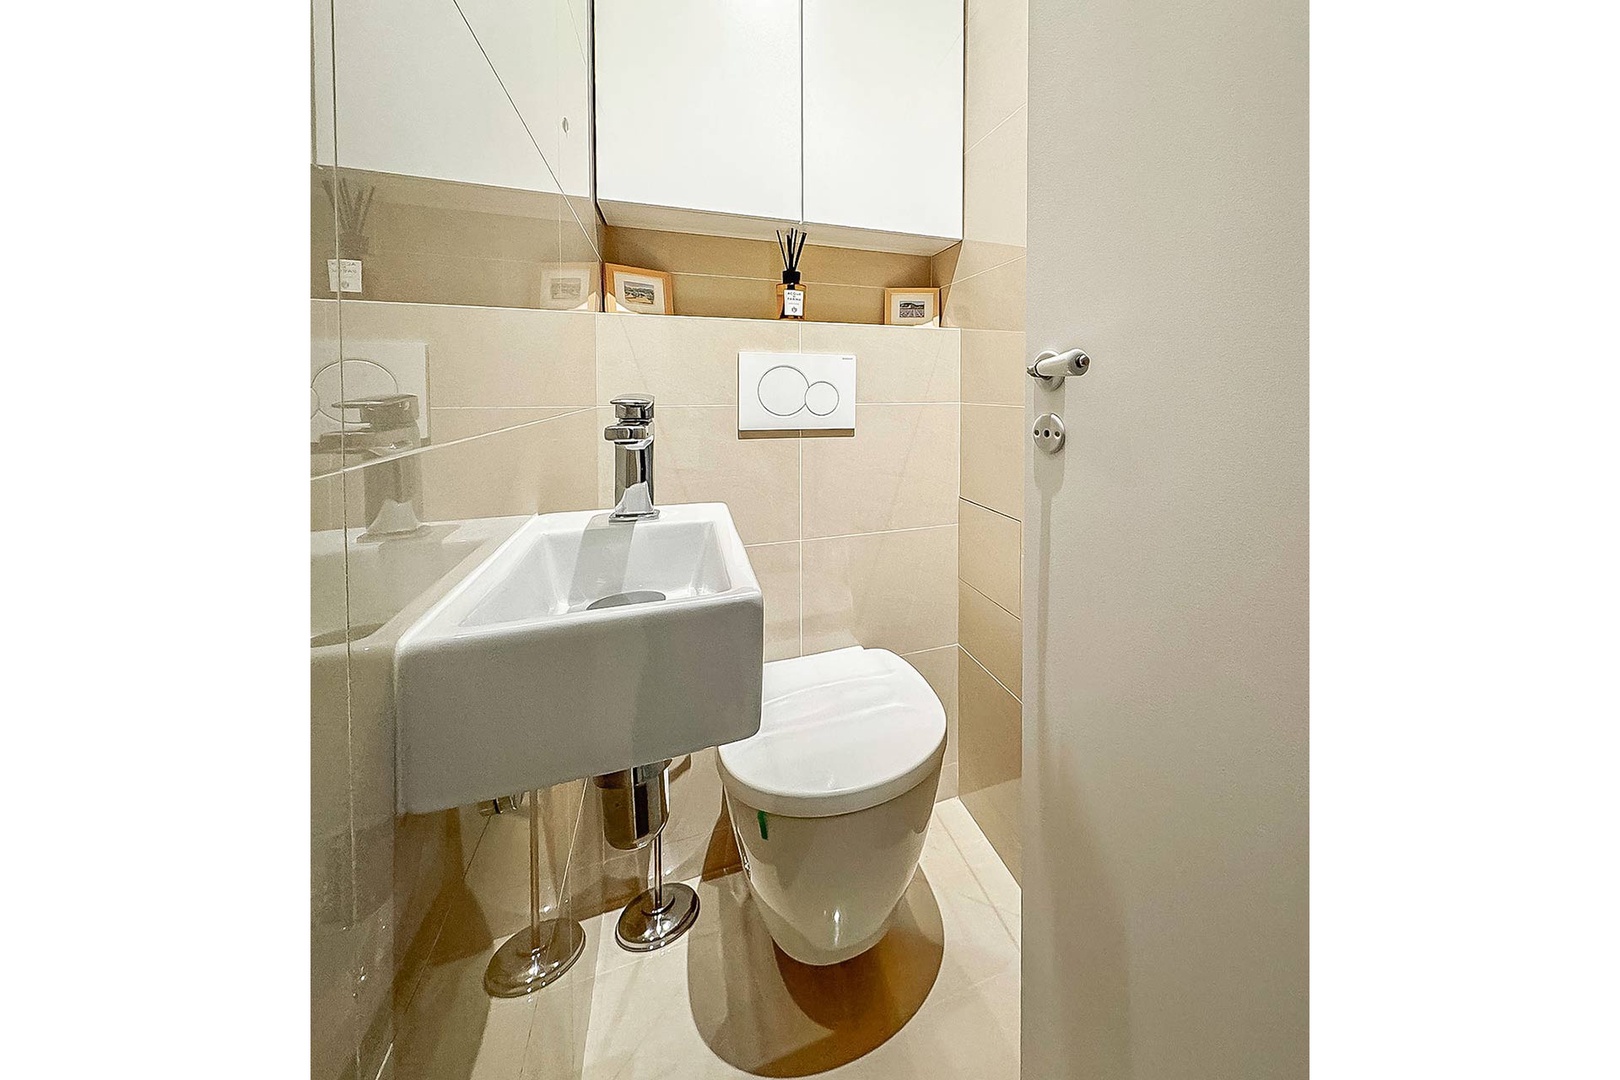 Separate powder room with toilet and sink.